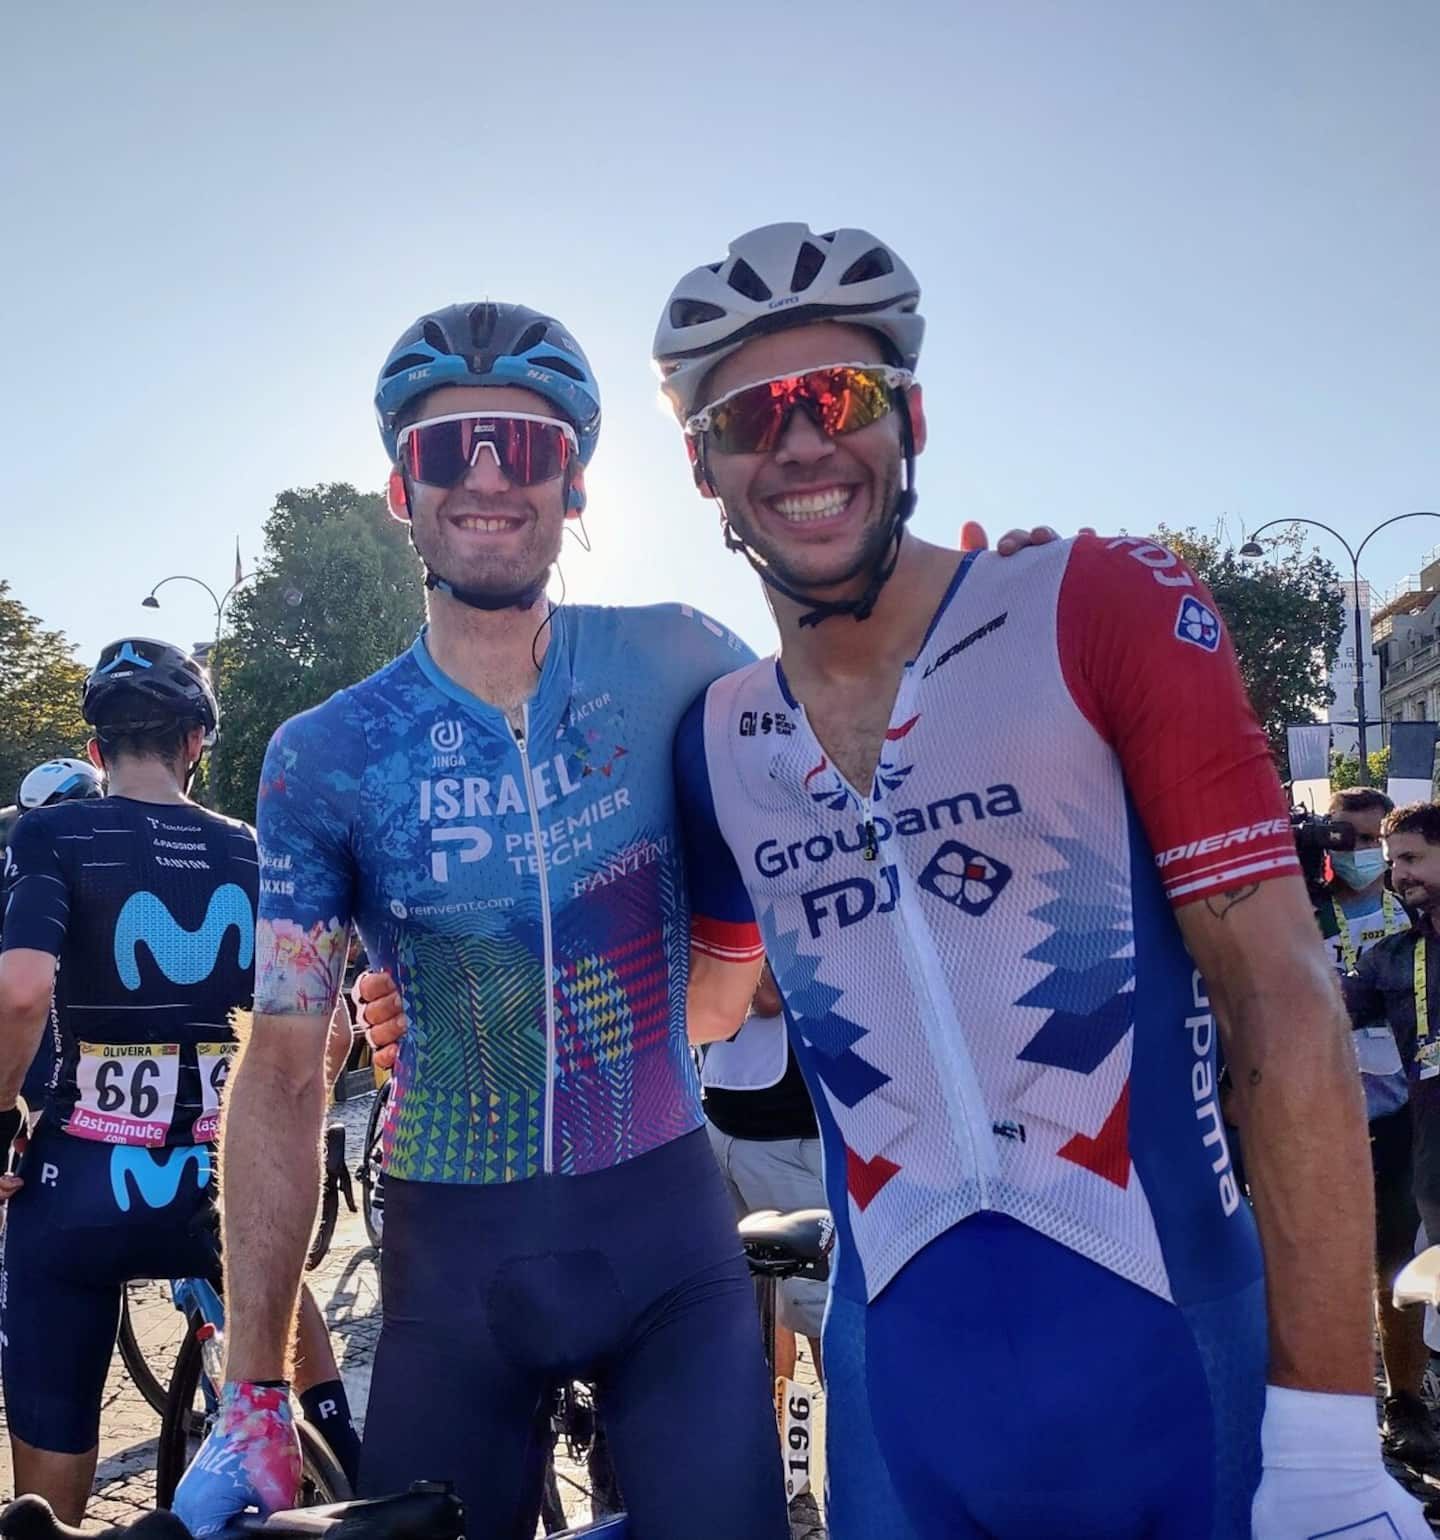 Tour de France: consecration, perseverance and the experience of a lifetime for Houle and Duchesne